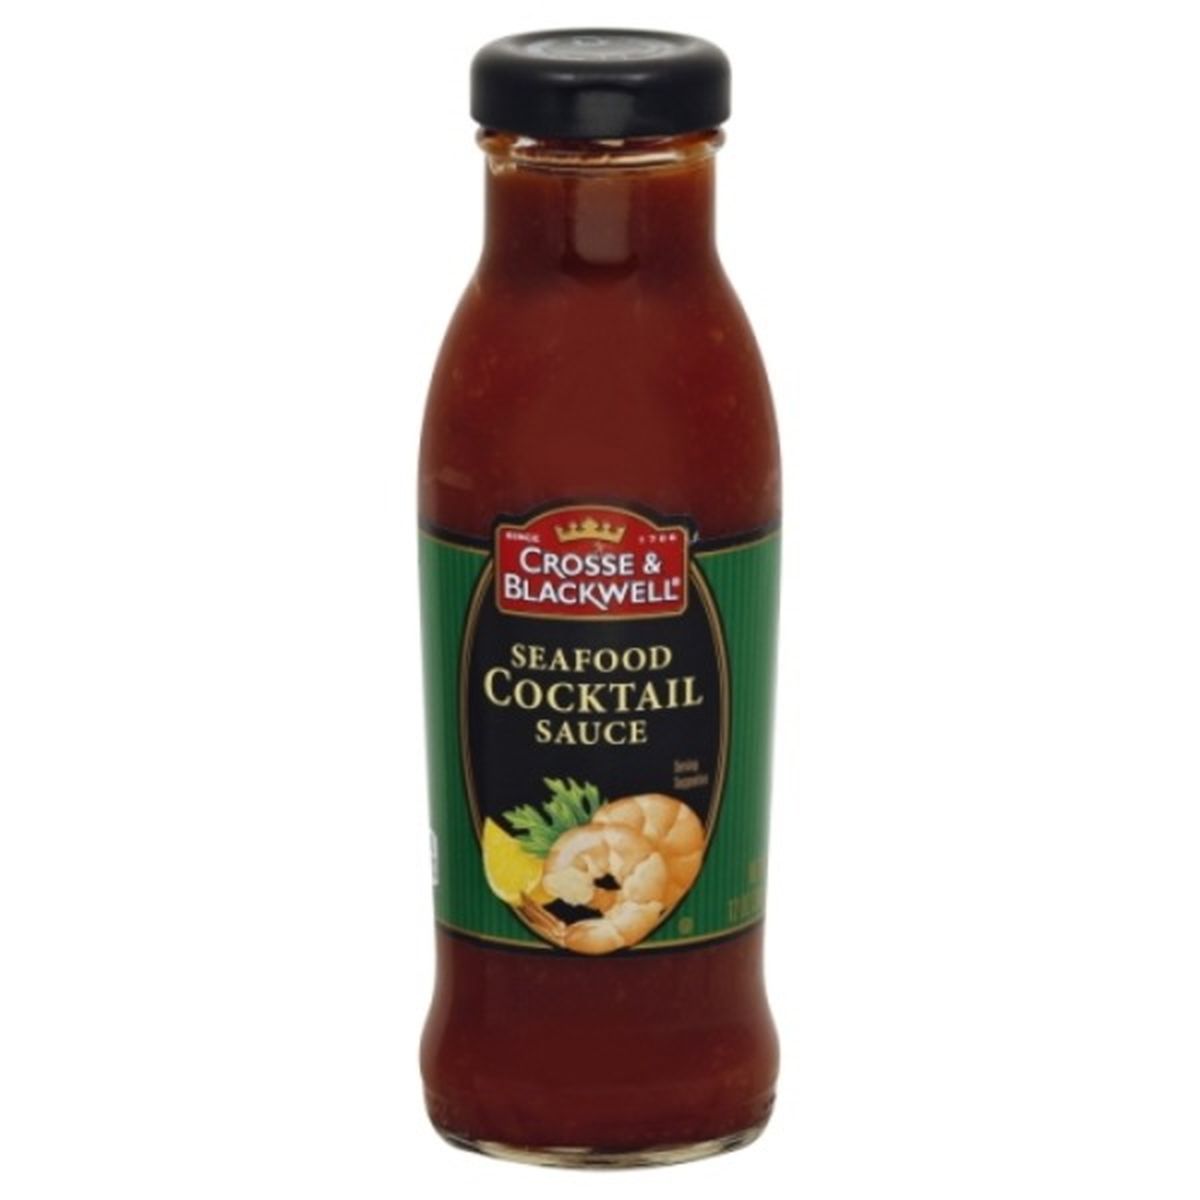 Calories in Crosse & Blackwell Cocktail Sauce, Seafood